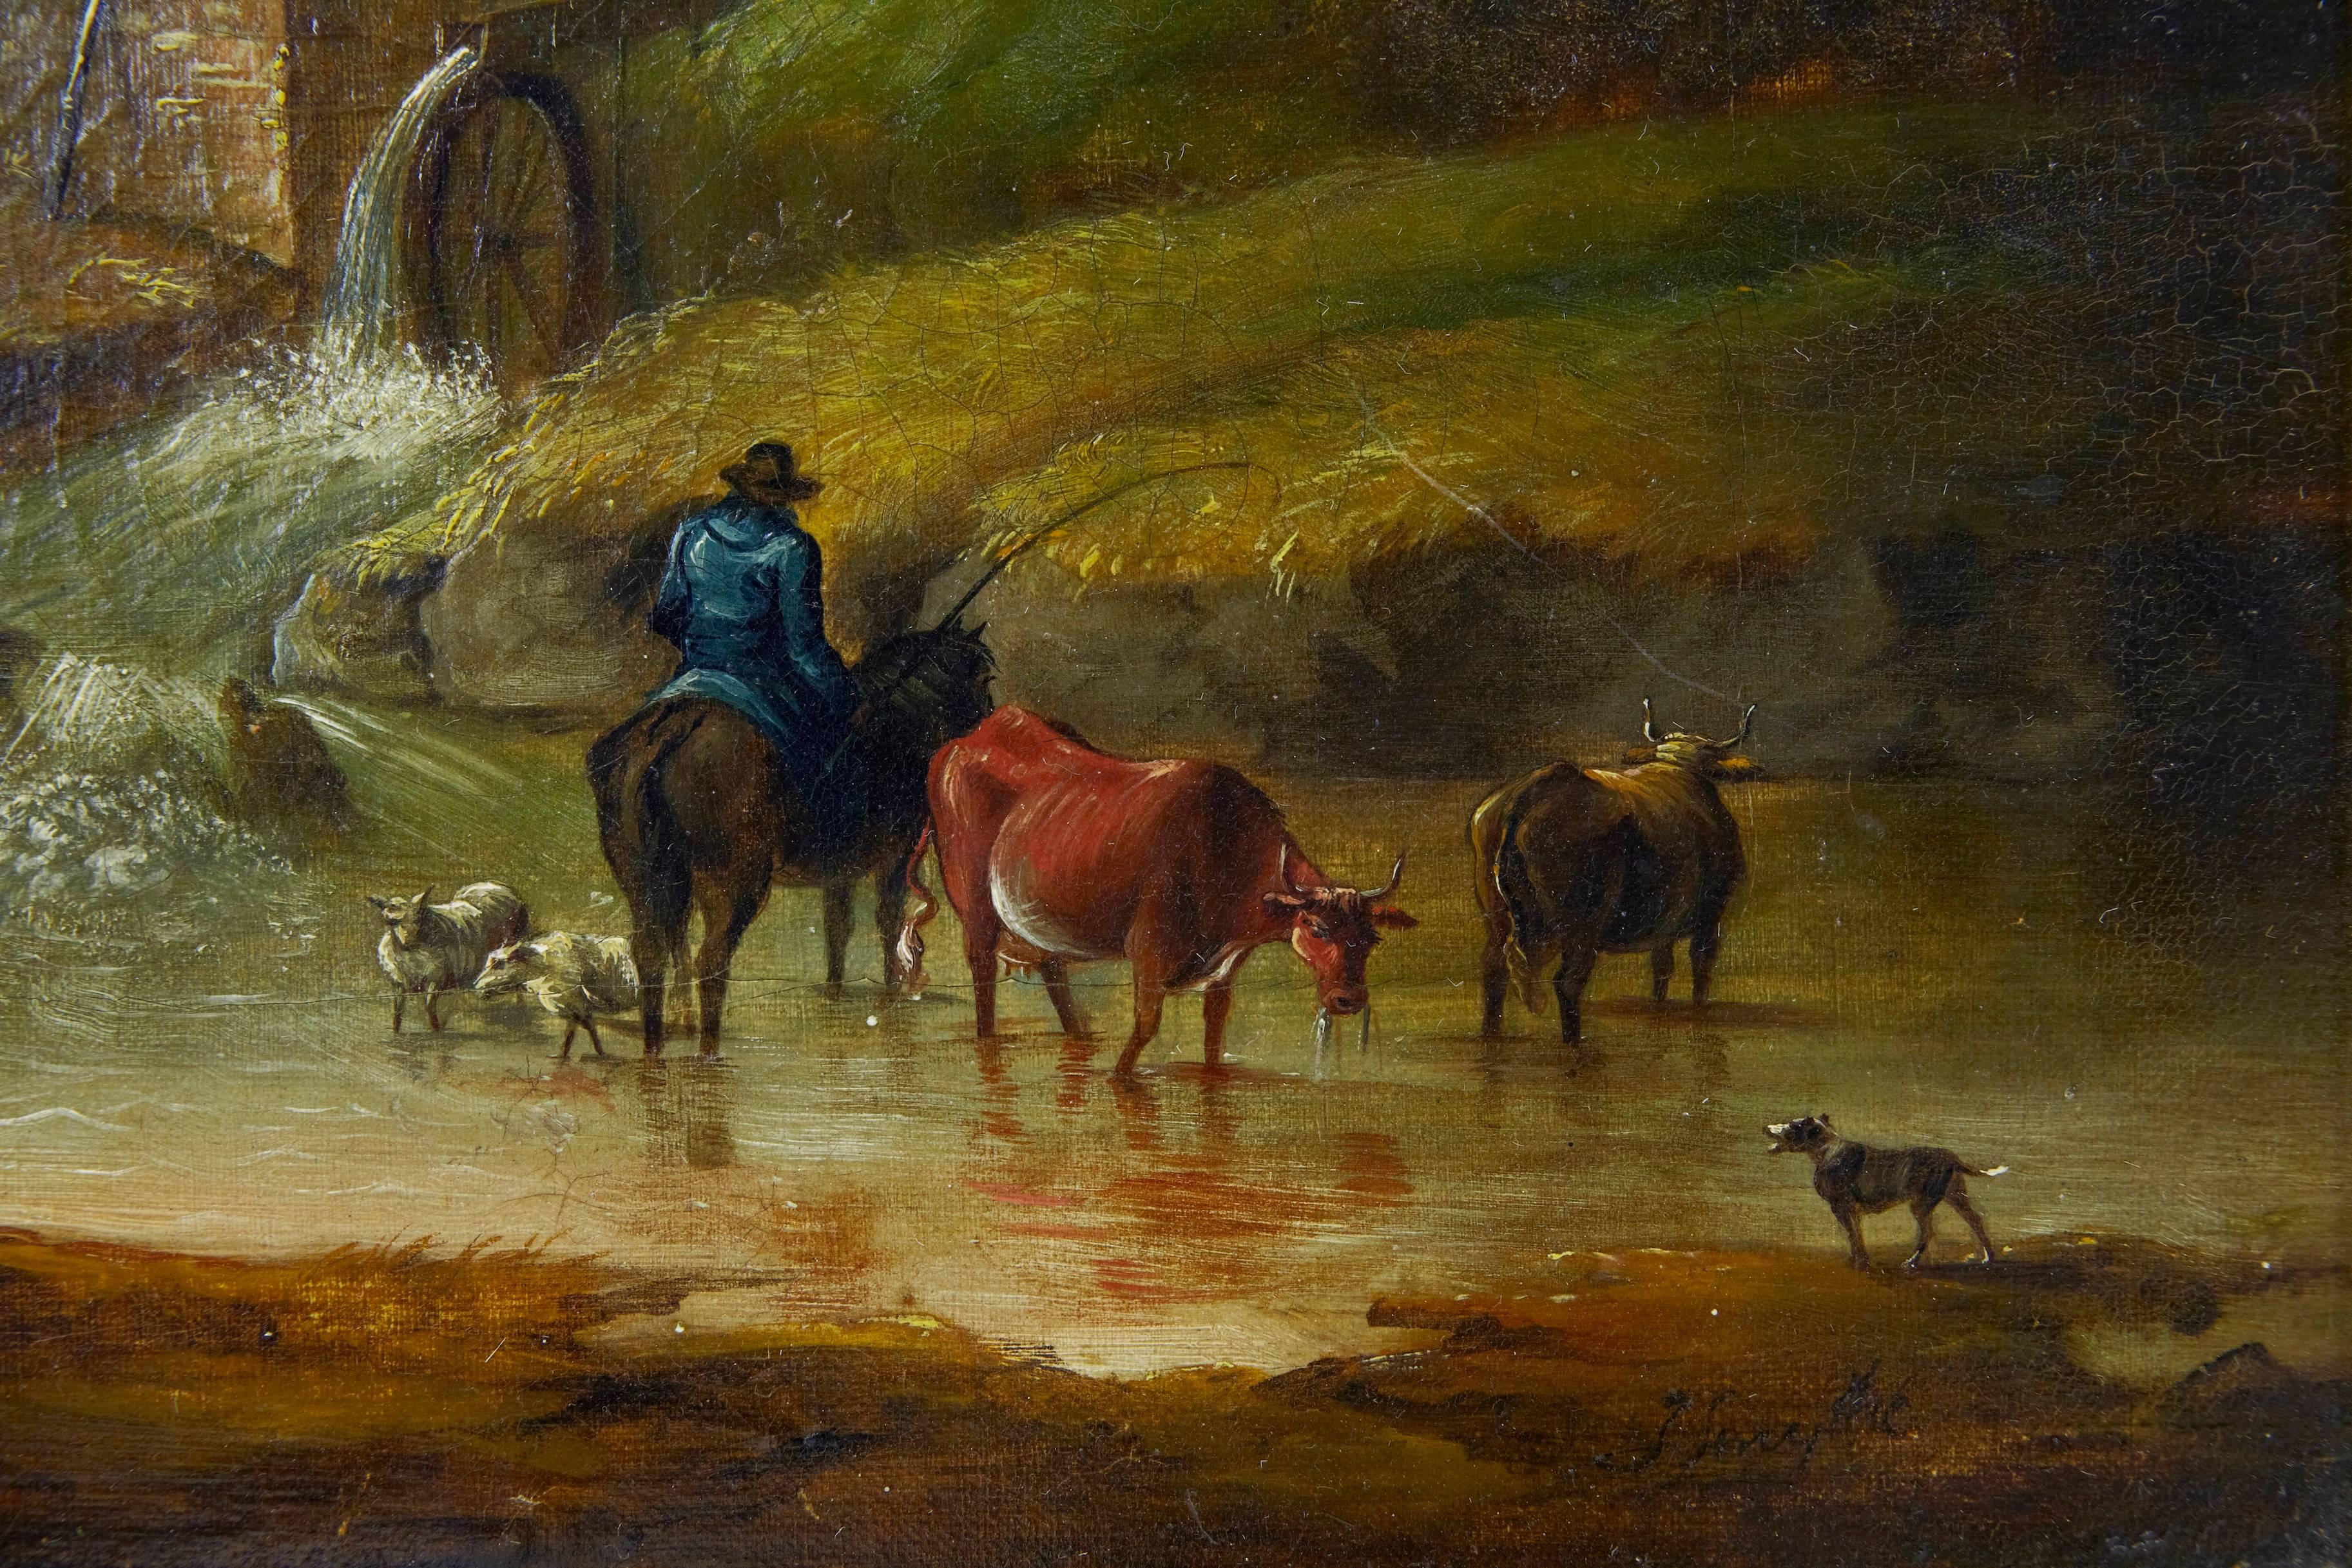 Thomas Smythe 1825-1907.
Oil on canvas depicting a farmer and cattle with watermill in the background.
In original gilt frame.
Signed bottom right corner.

Measures: Height: 19 1/4